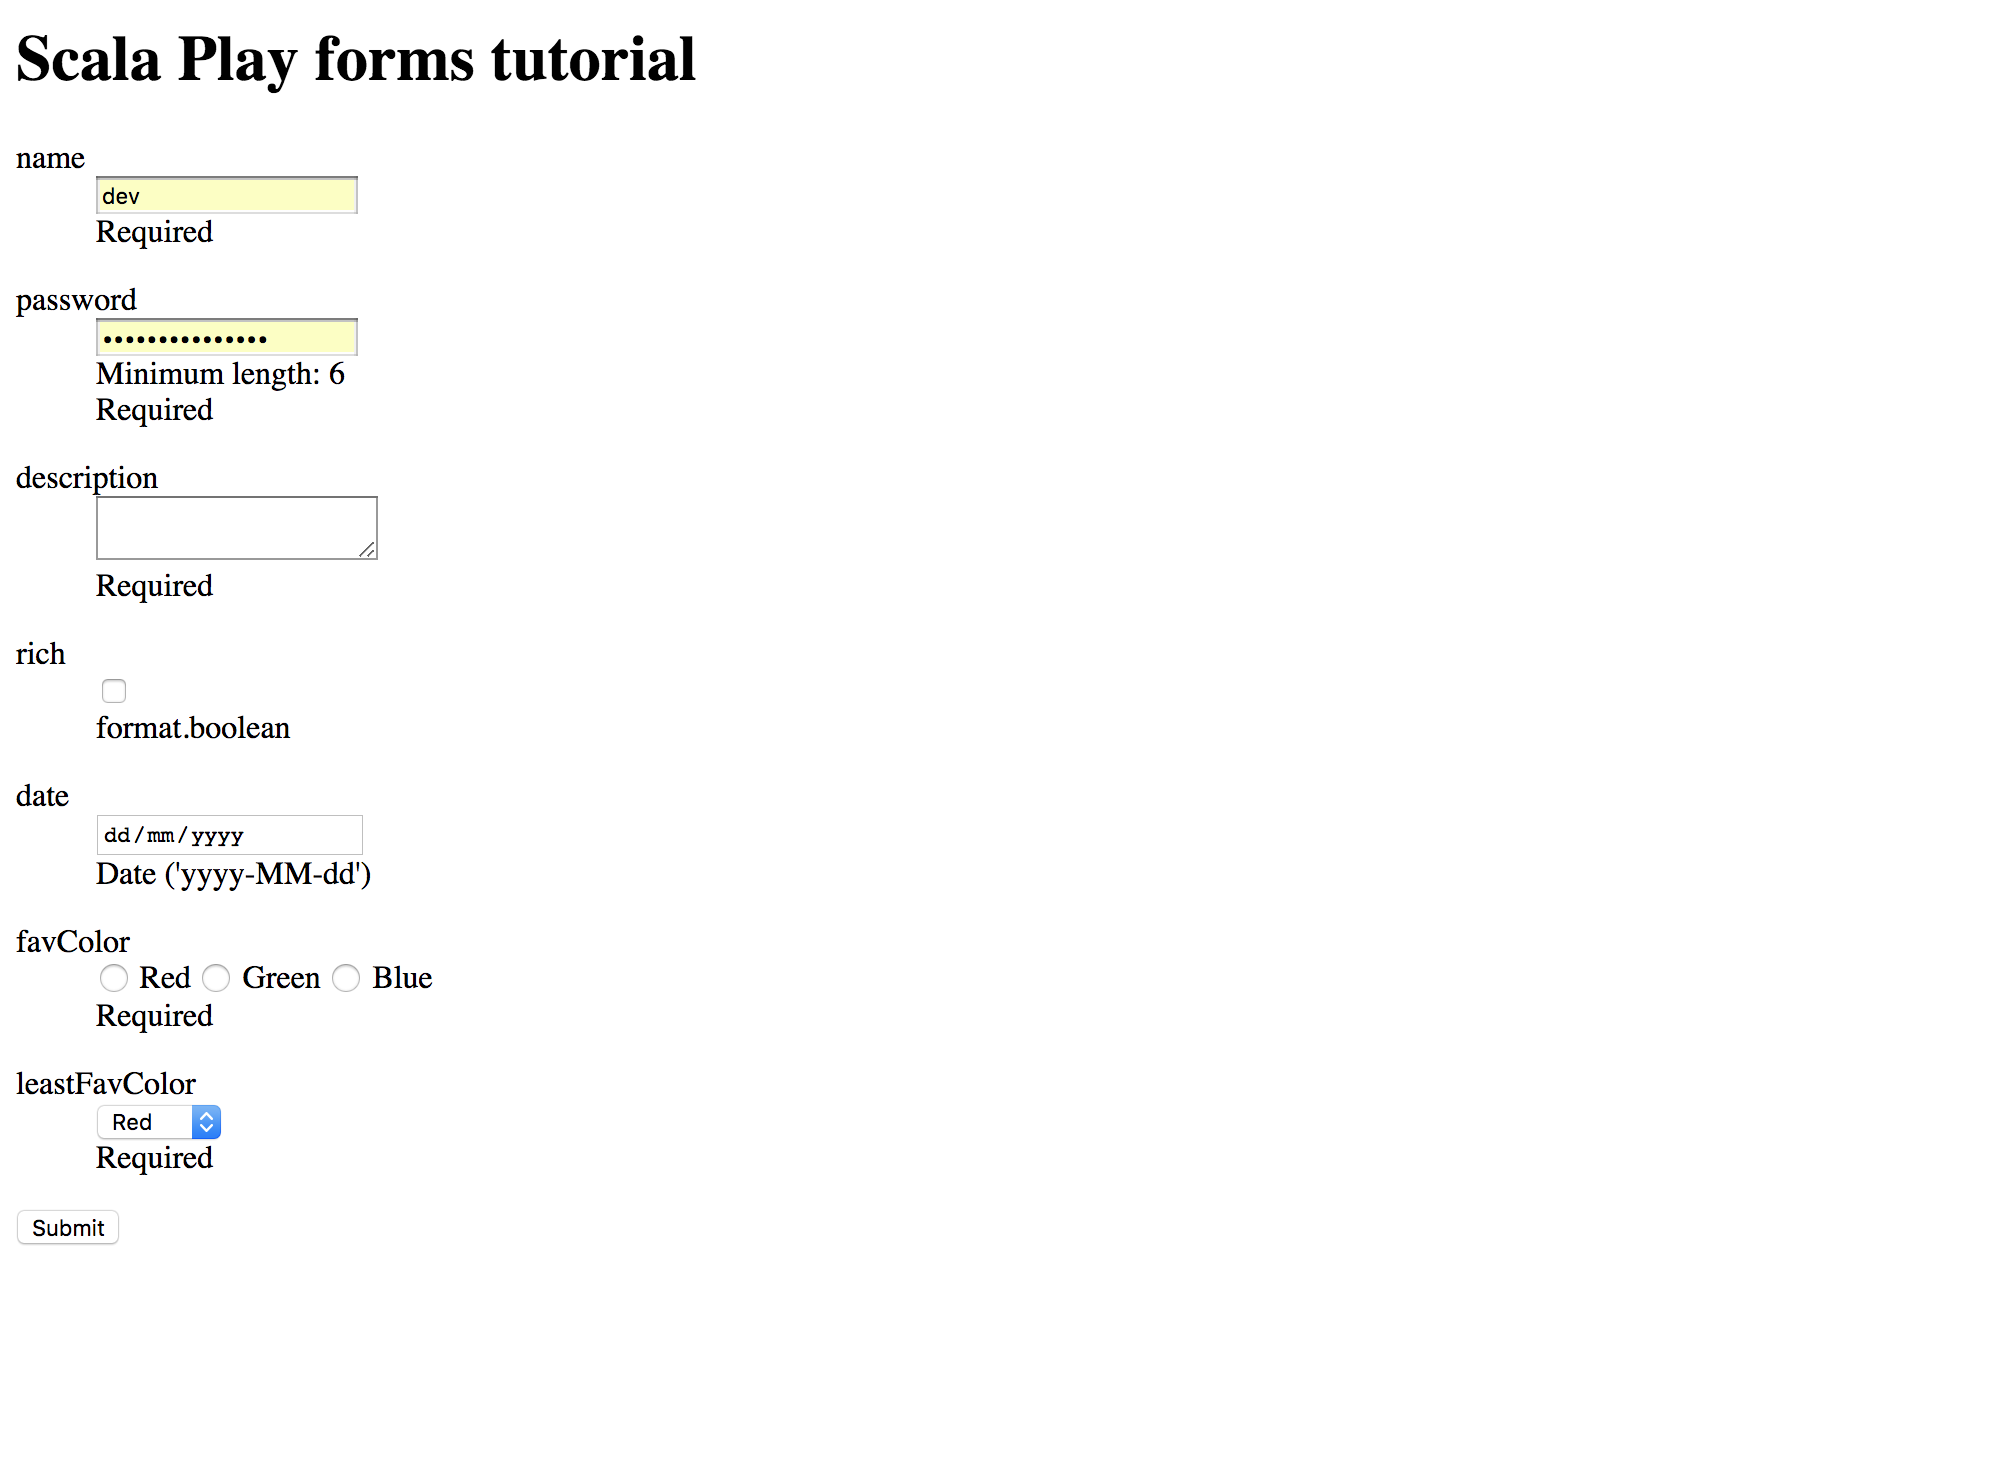 creating forms on your play application - part 1